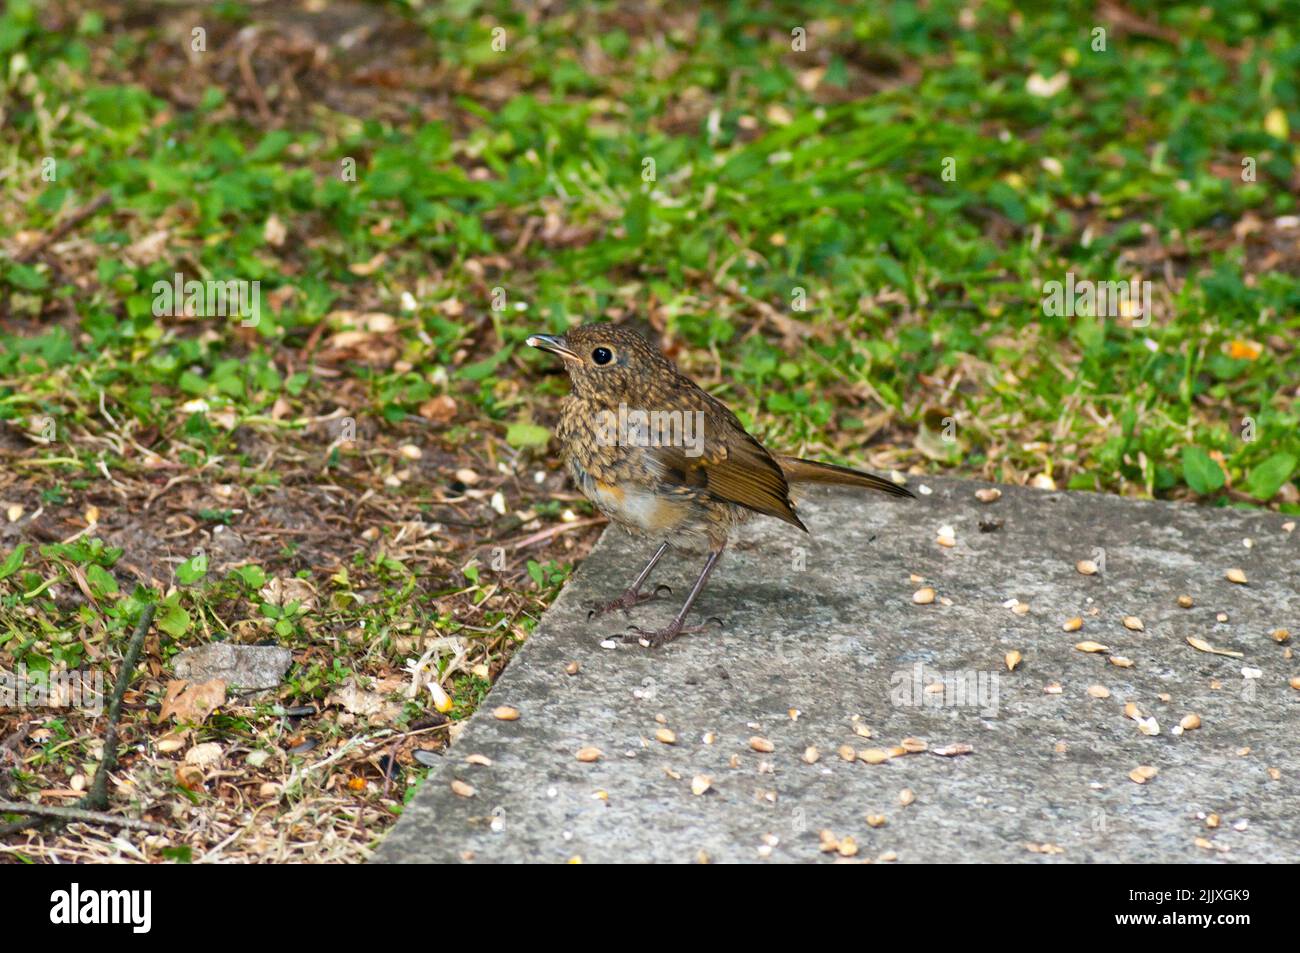 Juvenille Blackbird standing on its feet eating with food in its beak Stock Photo